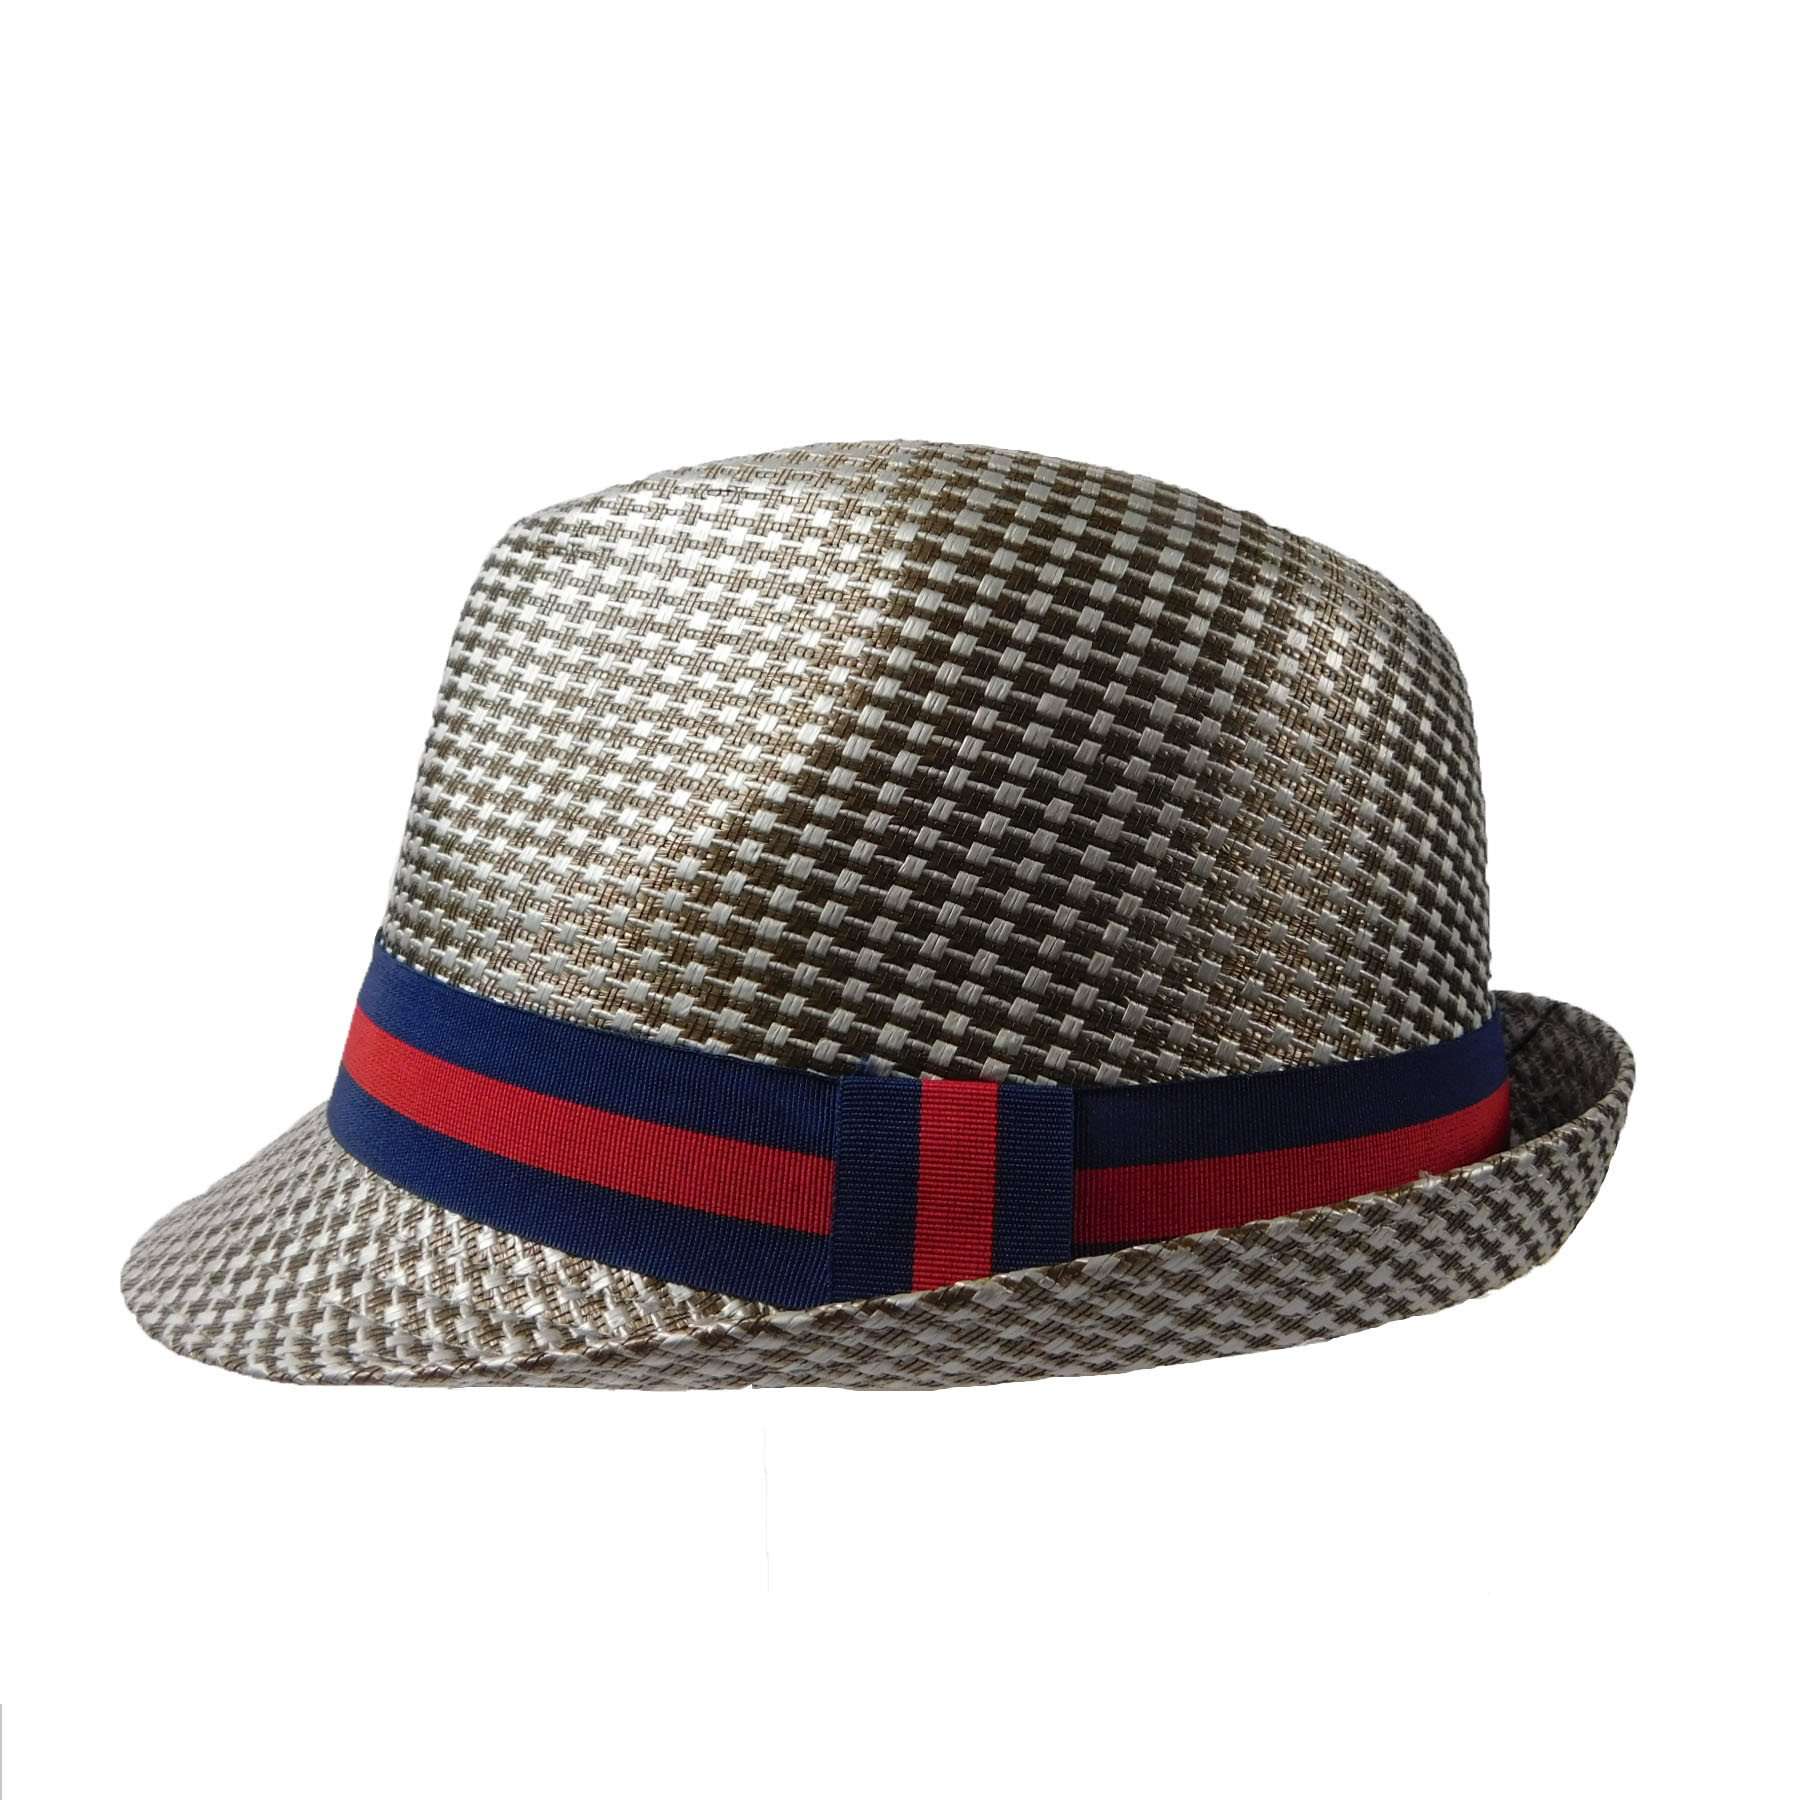 Fedora -Silver with Red and Navy Band Fedora Hat Mentone Beach MSPP859SLM Silver M 